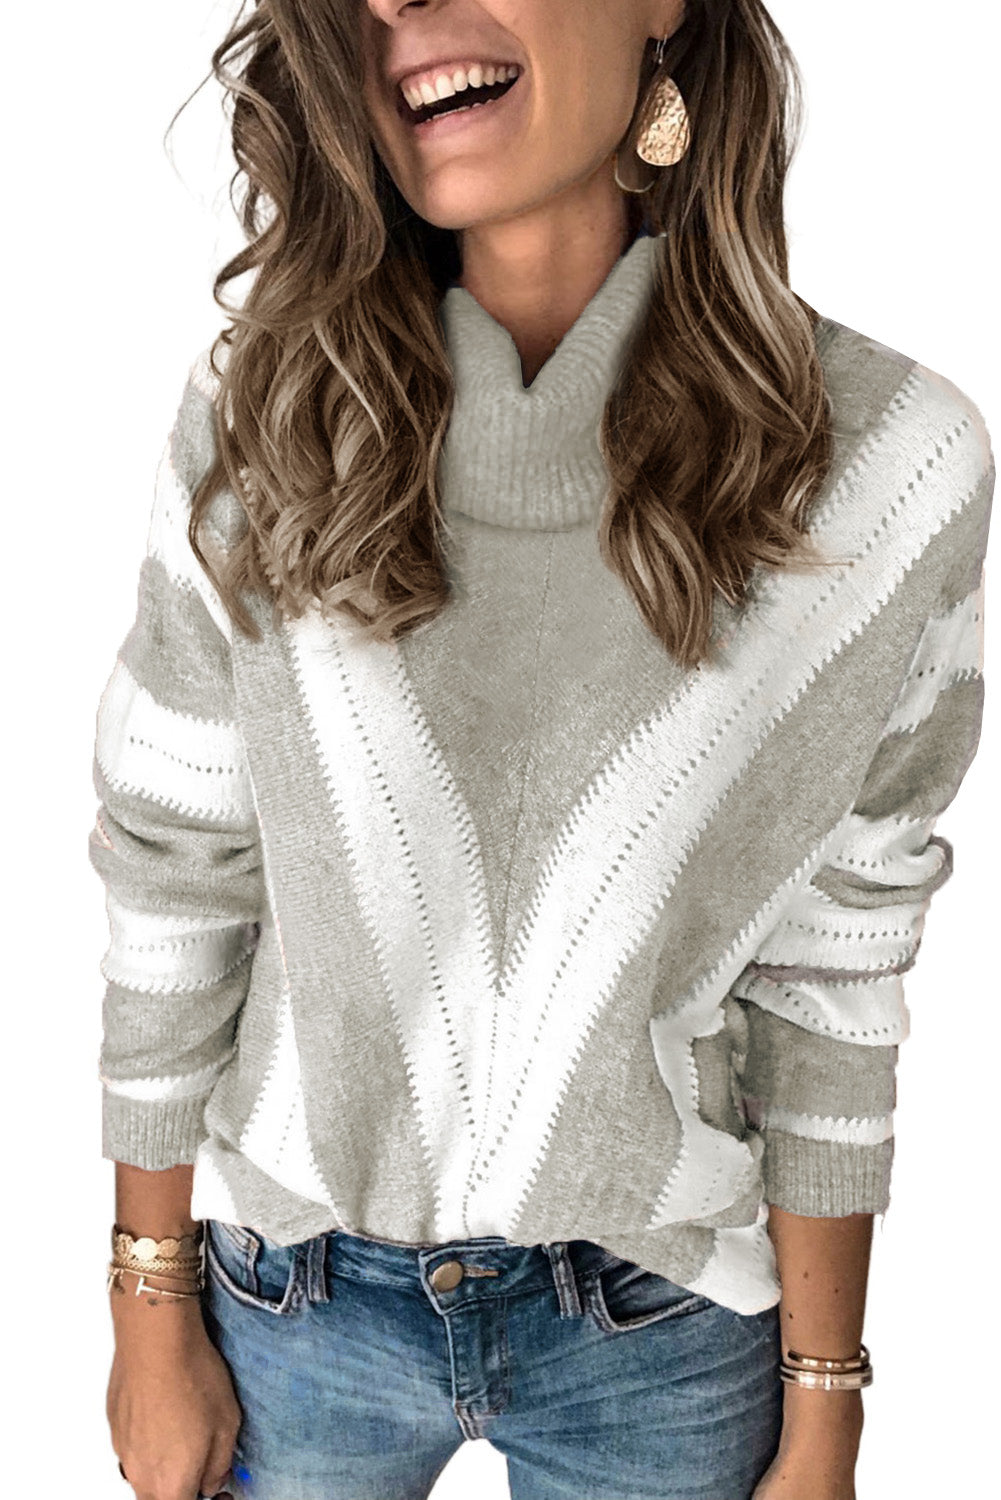 Striped Color Block Knitted Sweater